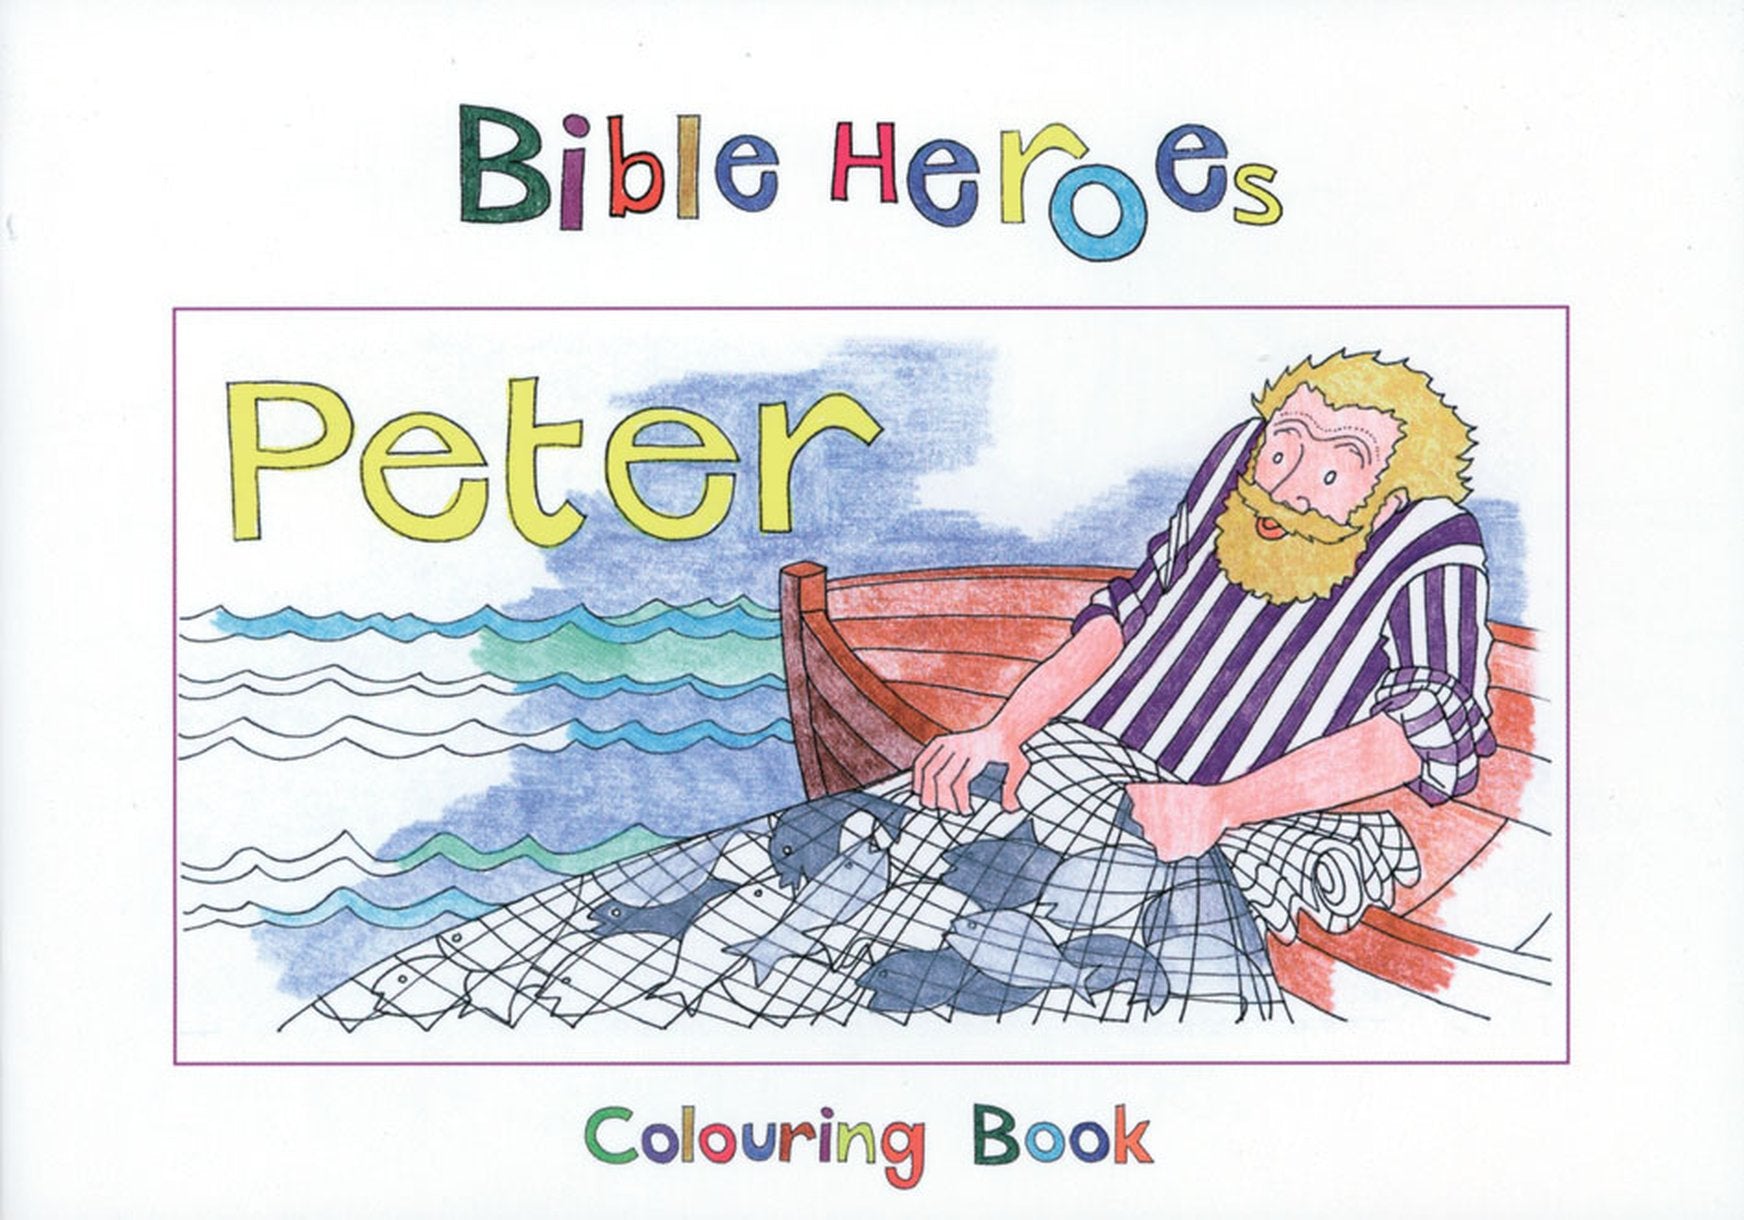 Image of Bible Heroes - Peter other